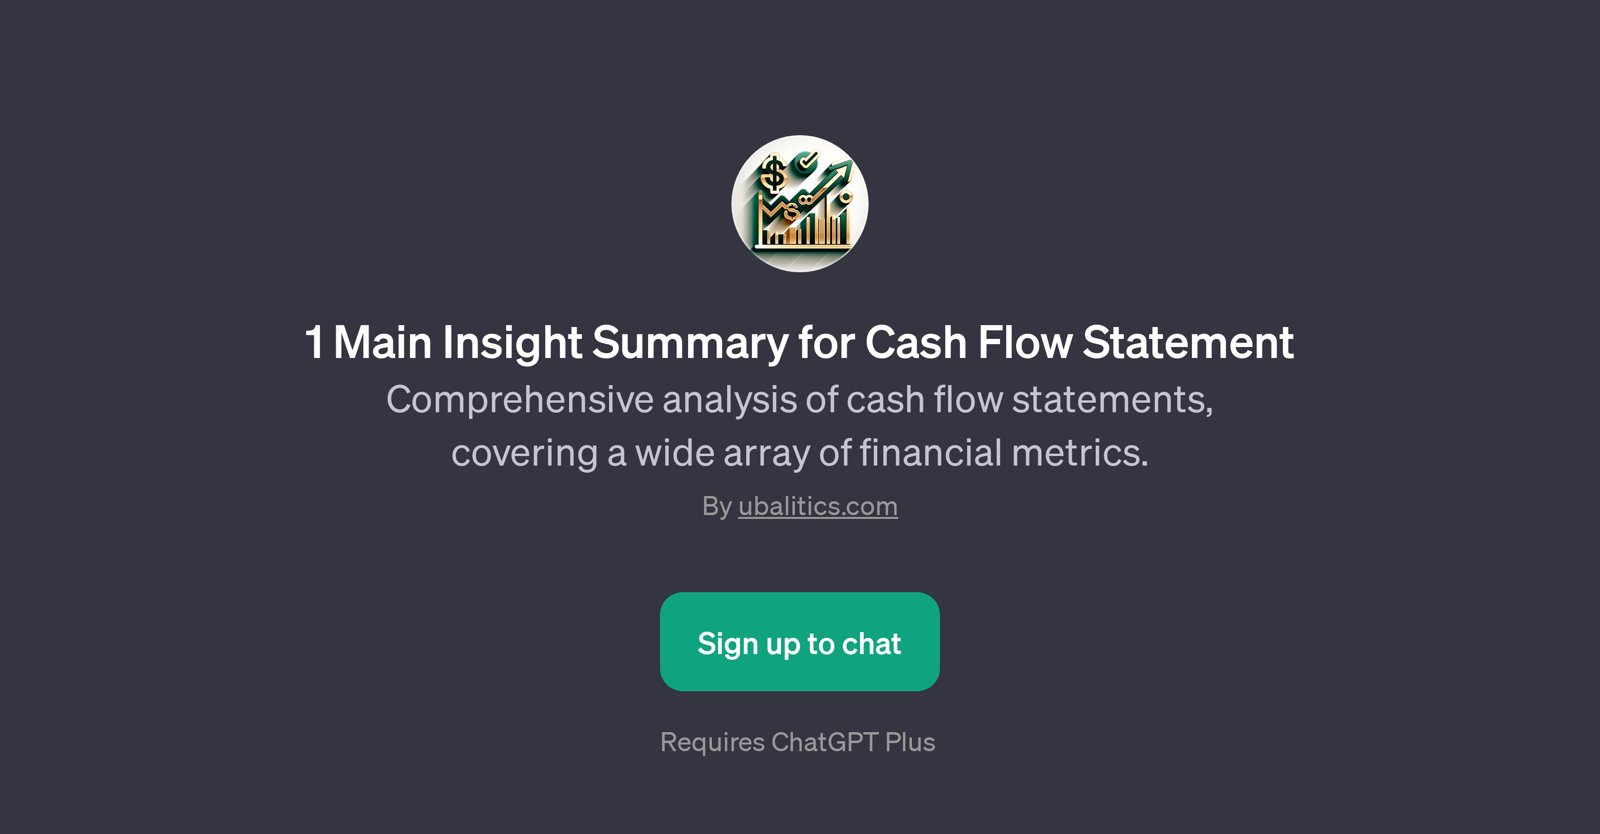 1 Main Insight Summary for Cash Flow Statement website